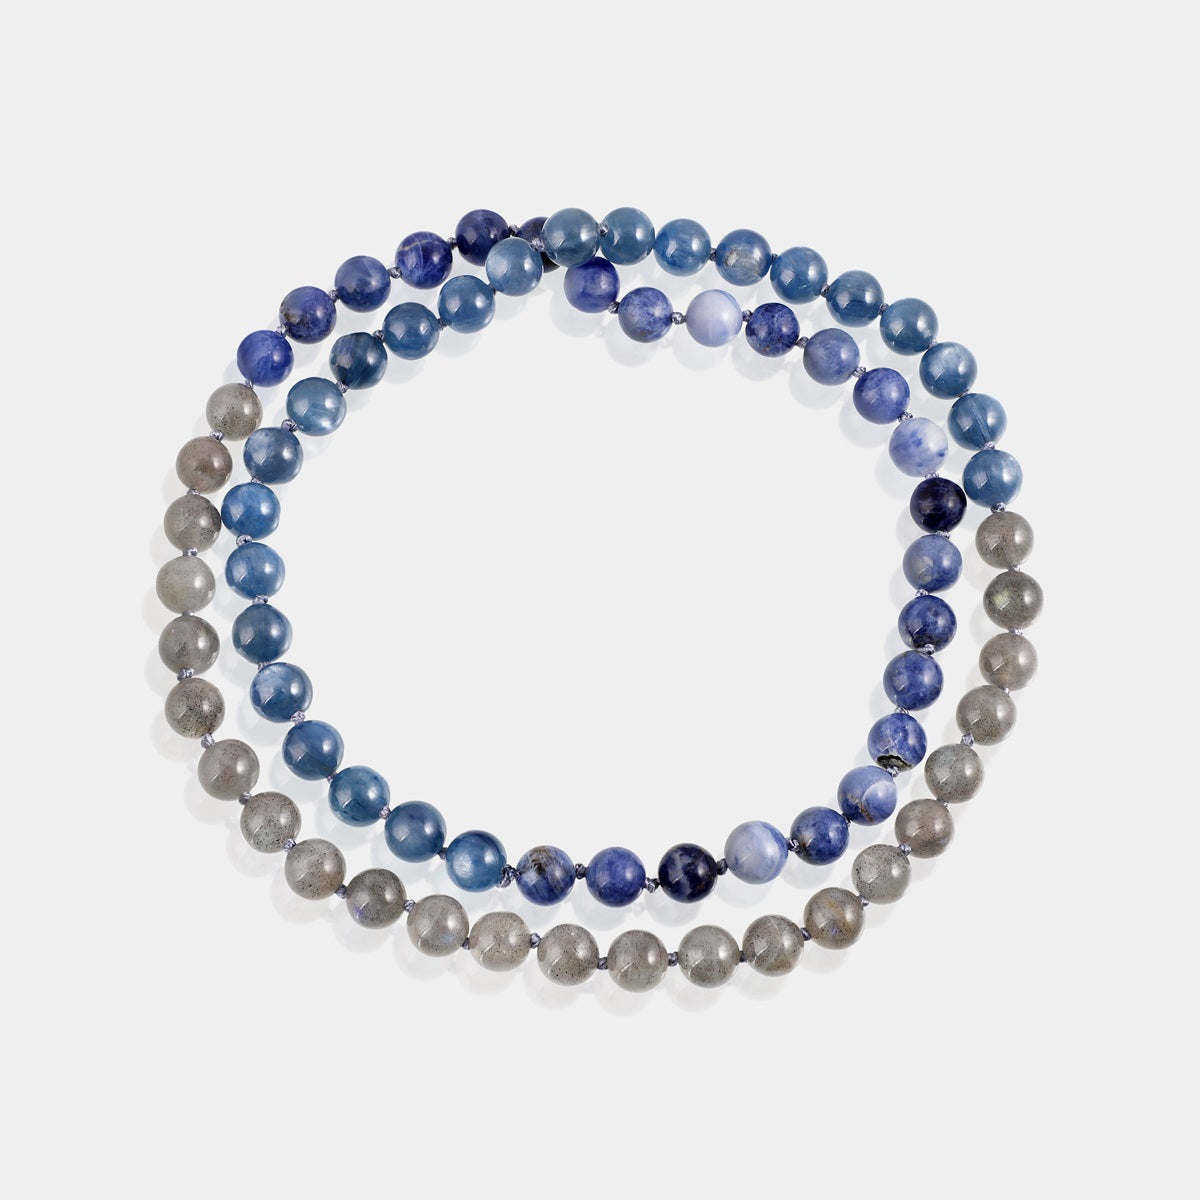 Beautifully arranged Jap Mala with 72 beads of Labradorite, Kyanite, and Sodalite for a harmonious and mindful spiritual experience